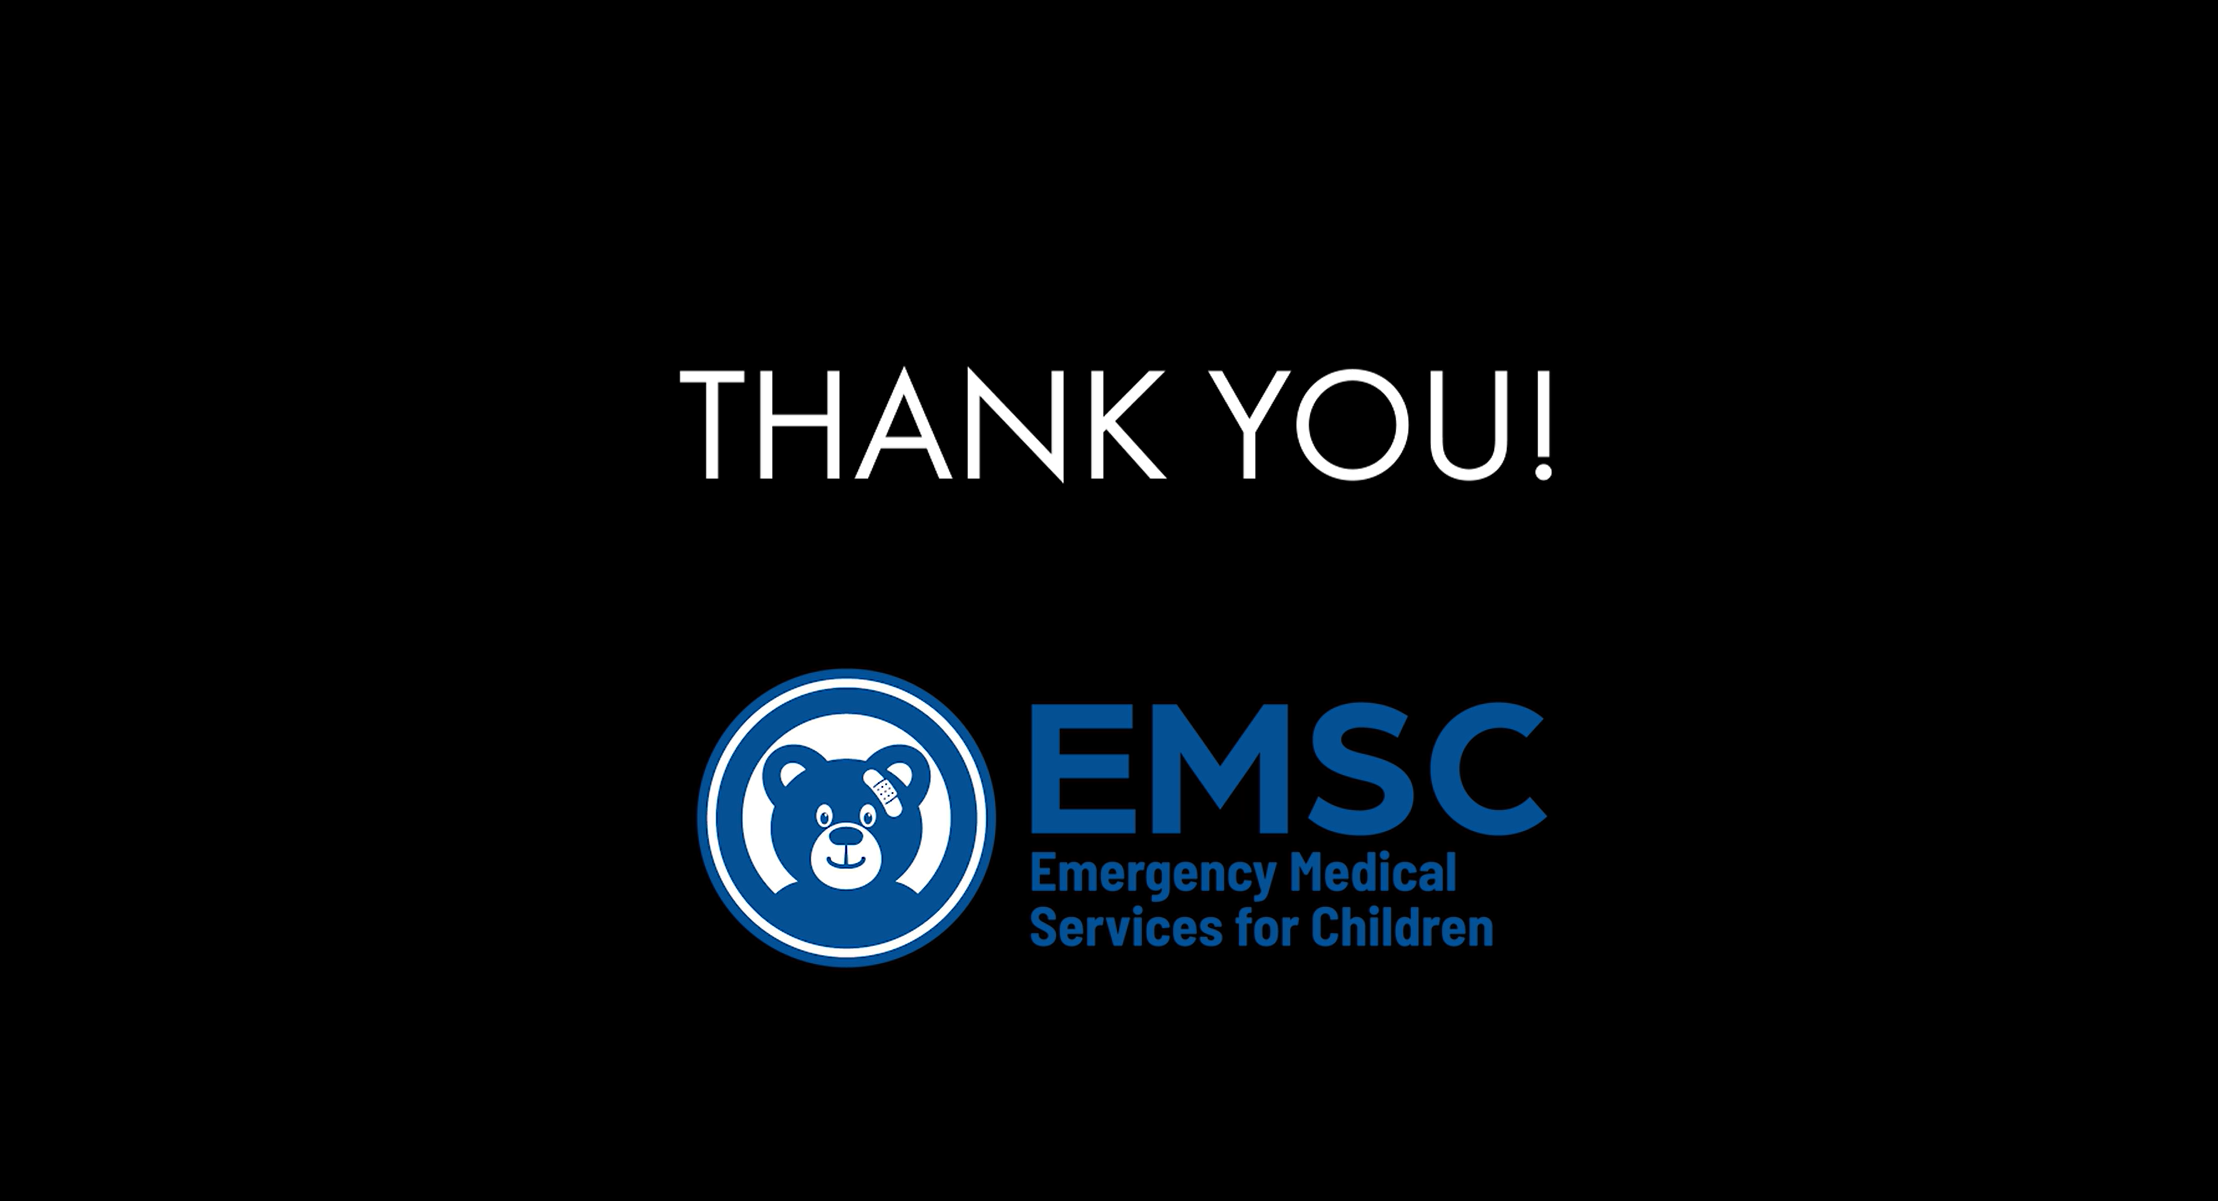 Thank You from the EMSC Program